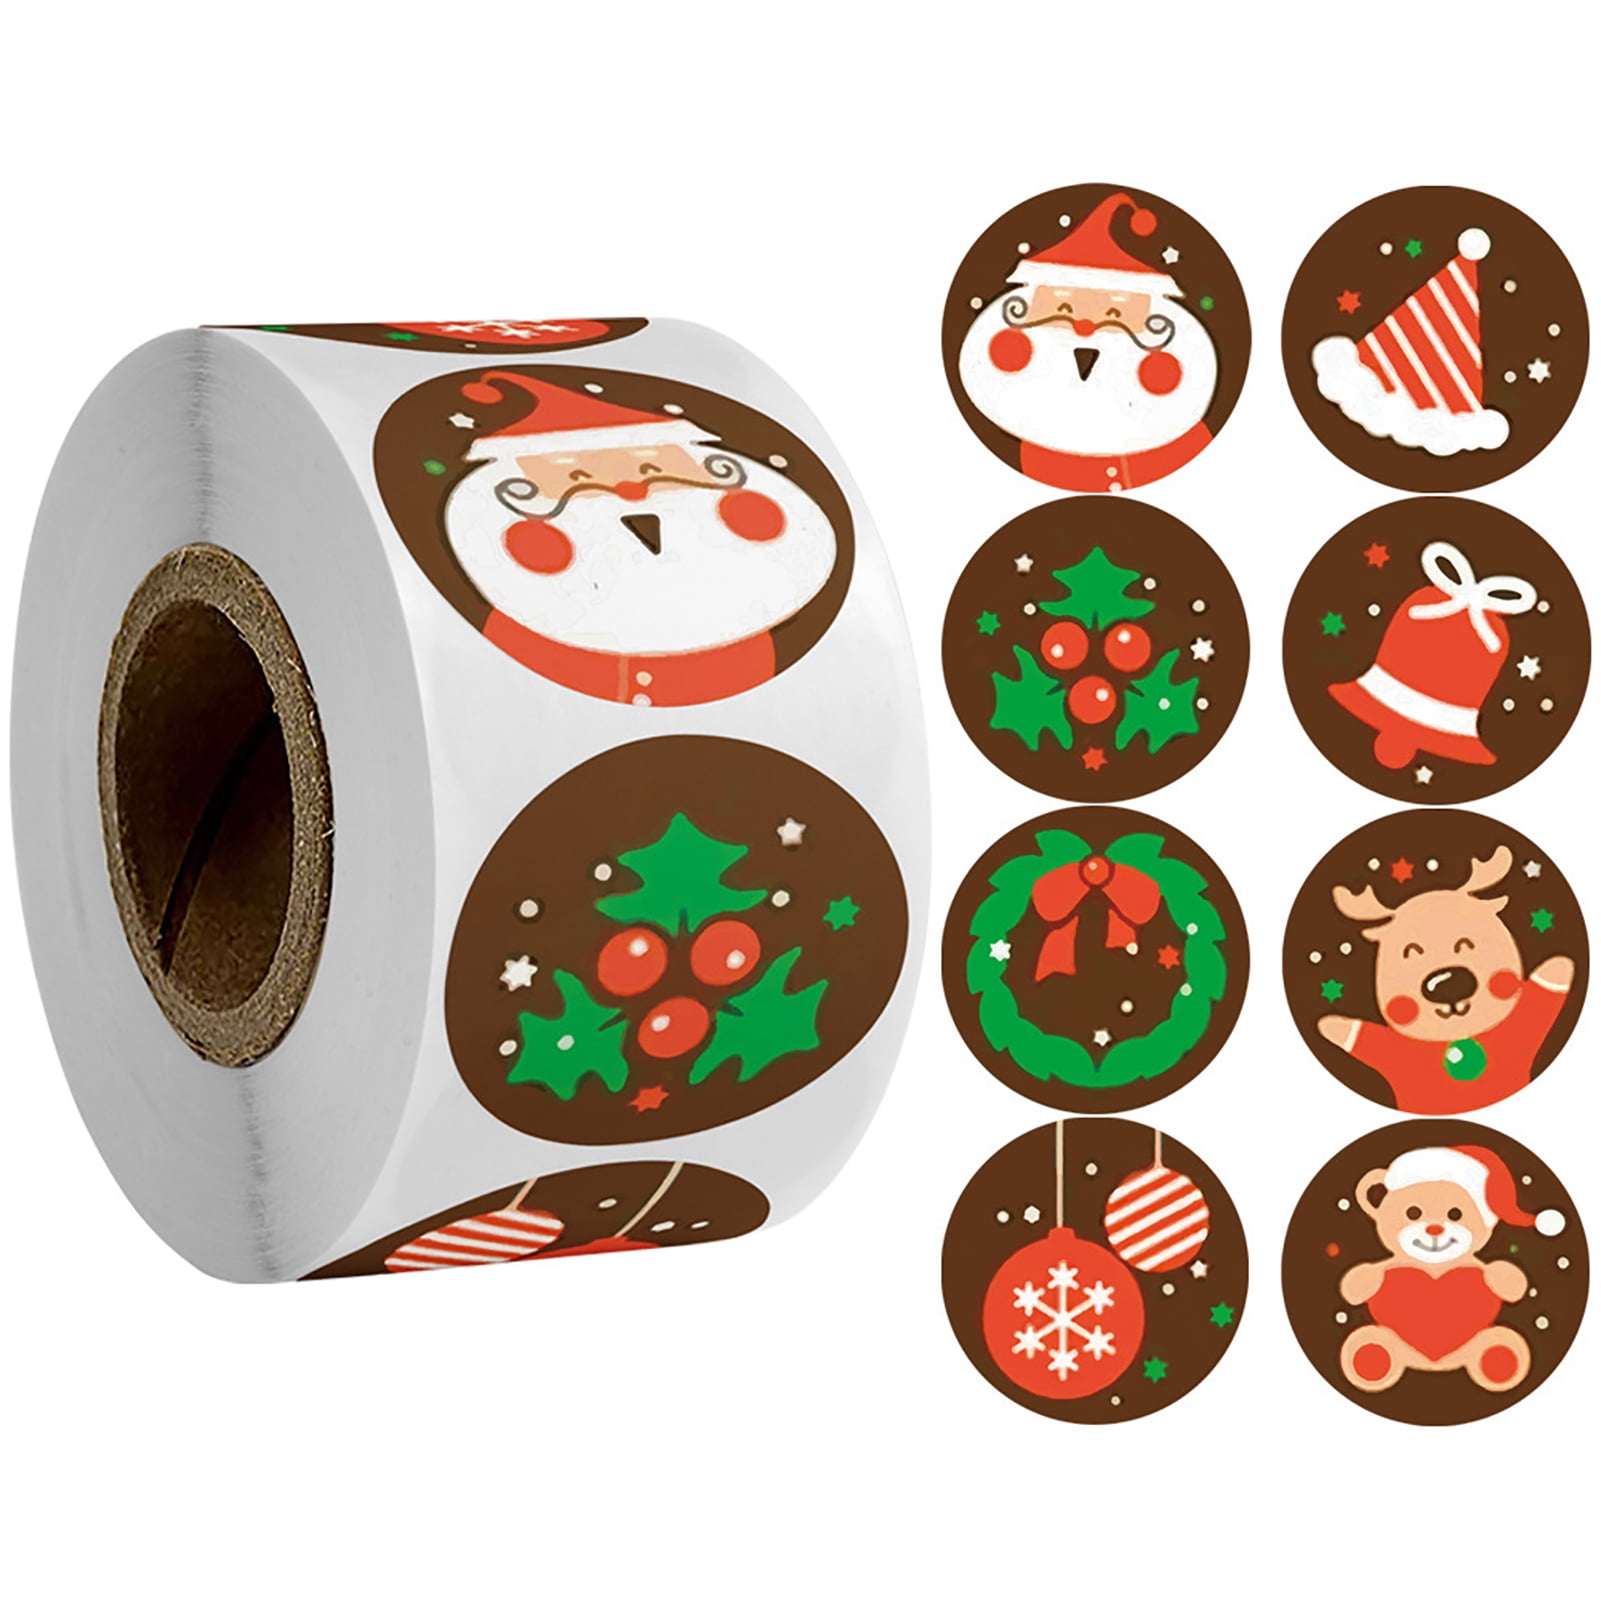 Koogel 500 pcs Merry Christmas Stickers Seal Labels Black Gold Round Roll 2 Inch Self Adhesive Christmas Gift Tags Present for Bookmarks Scrapbooks Gift Paper Wrappers Xmas Gift Box Labels 